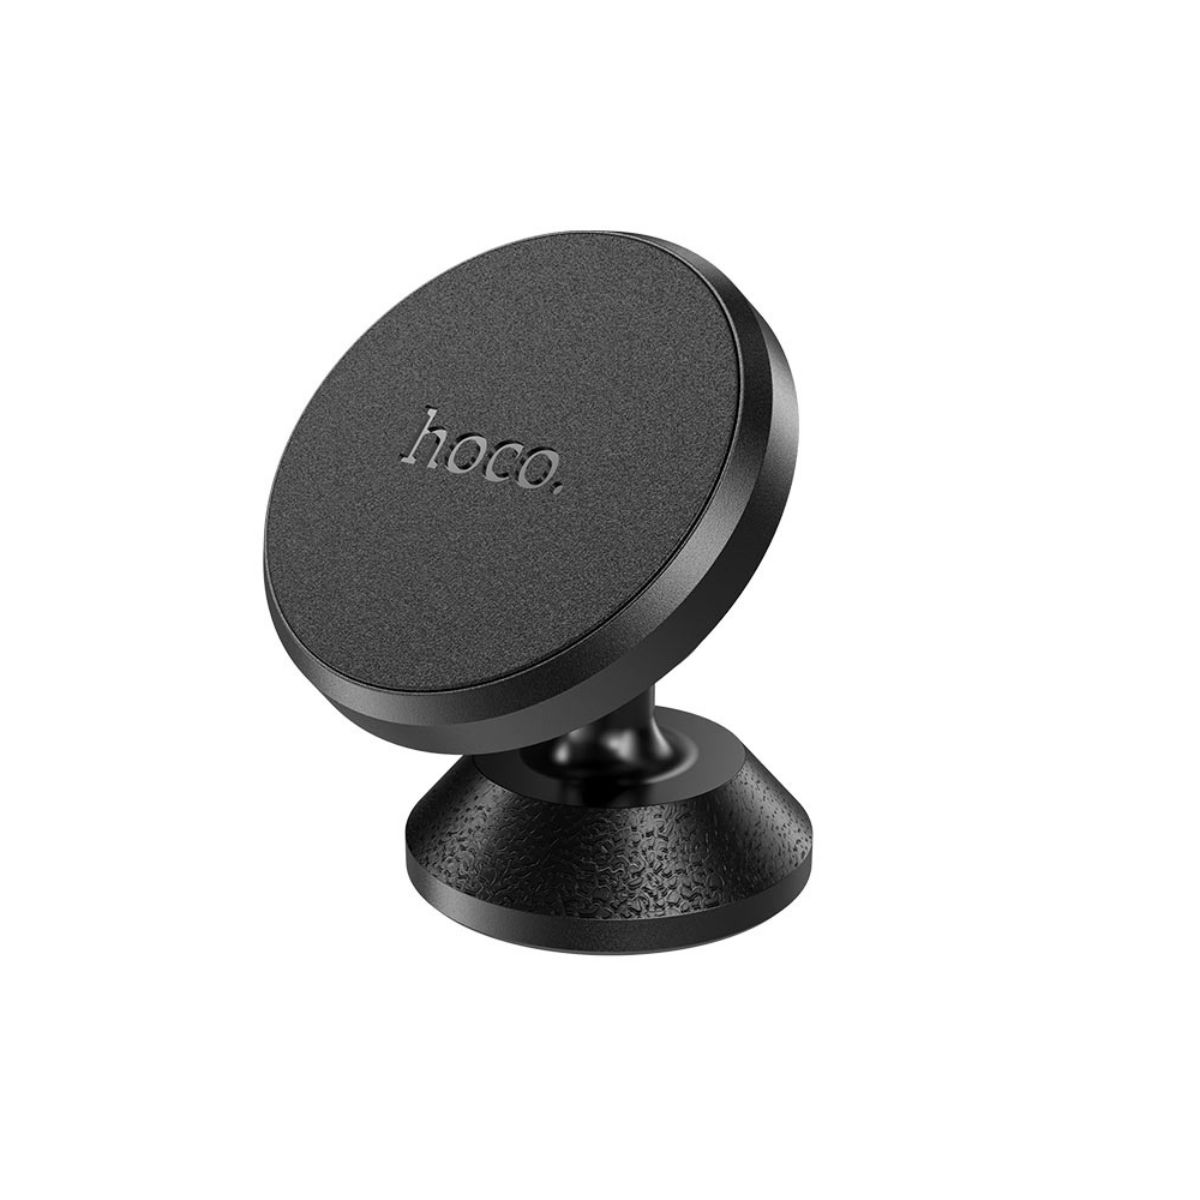 Hoco CA79 Ligue Central Console Magnetic Car Holder - Black